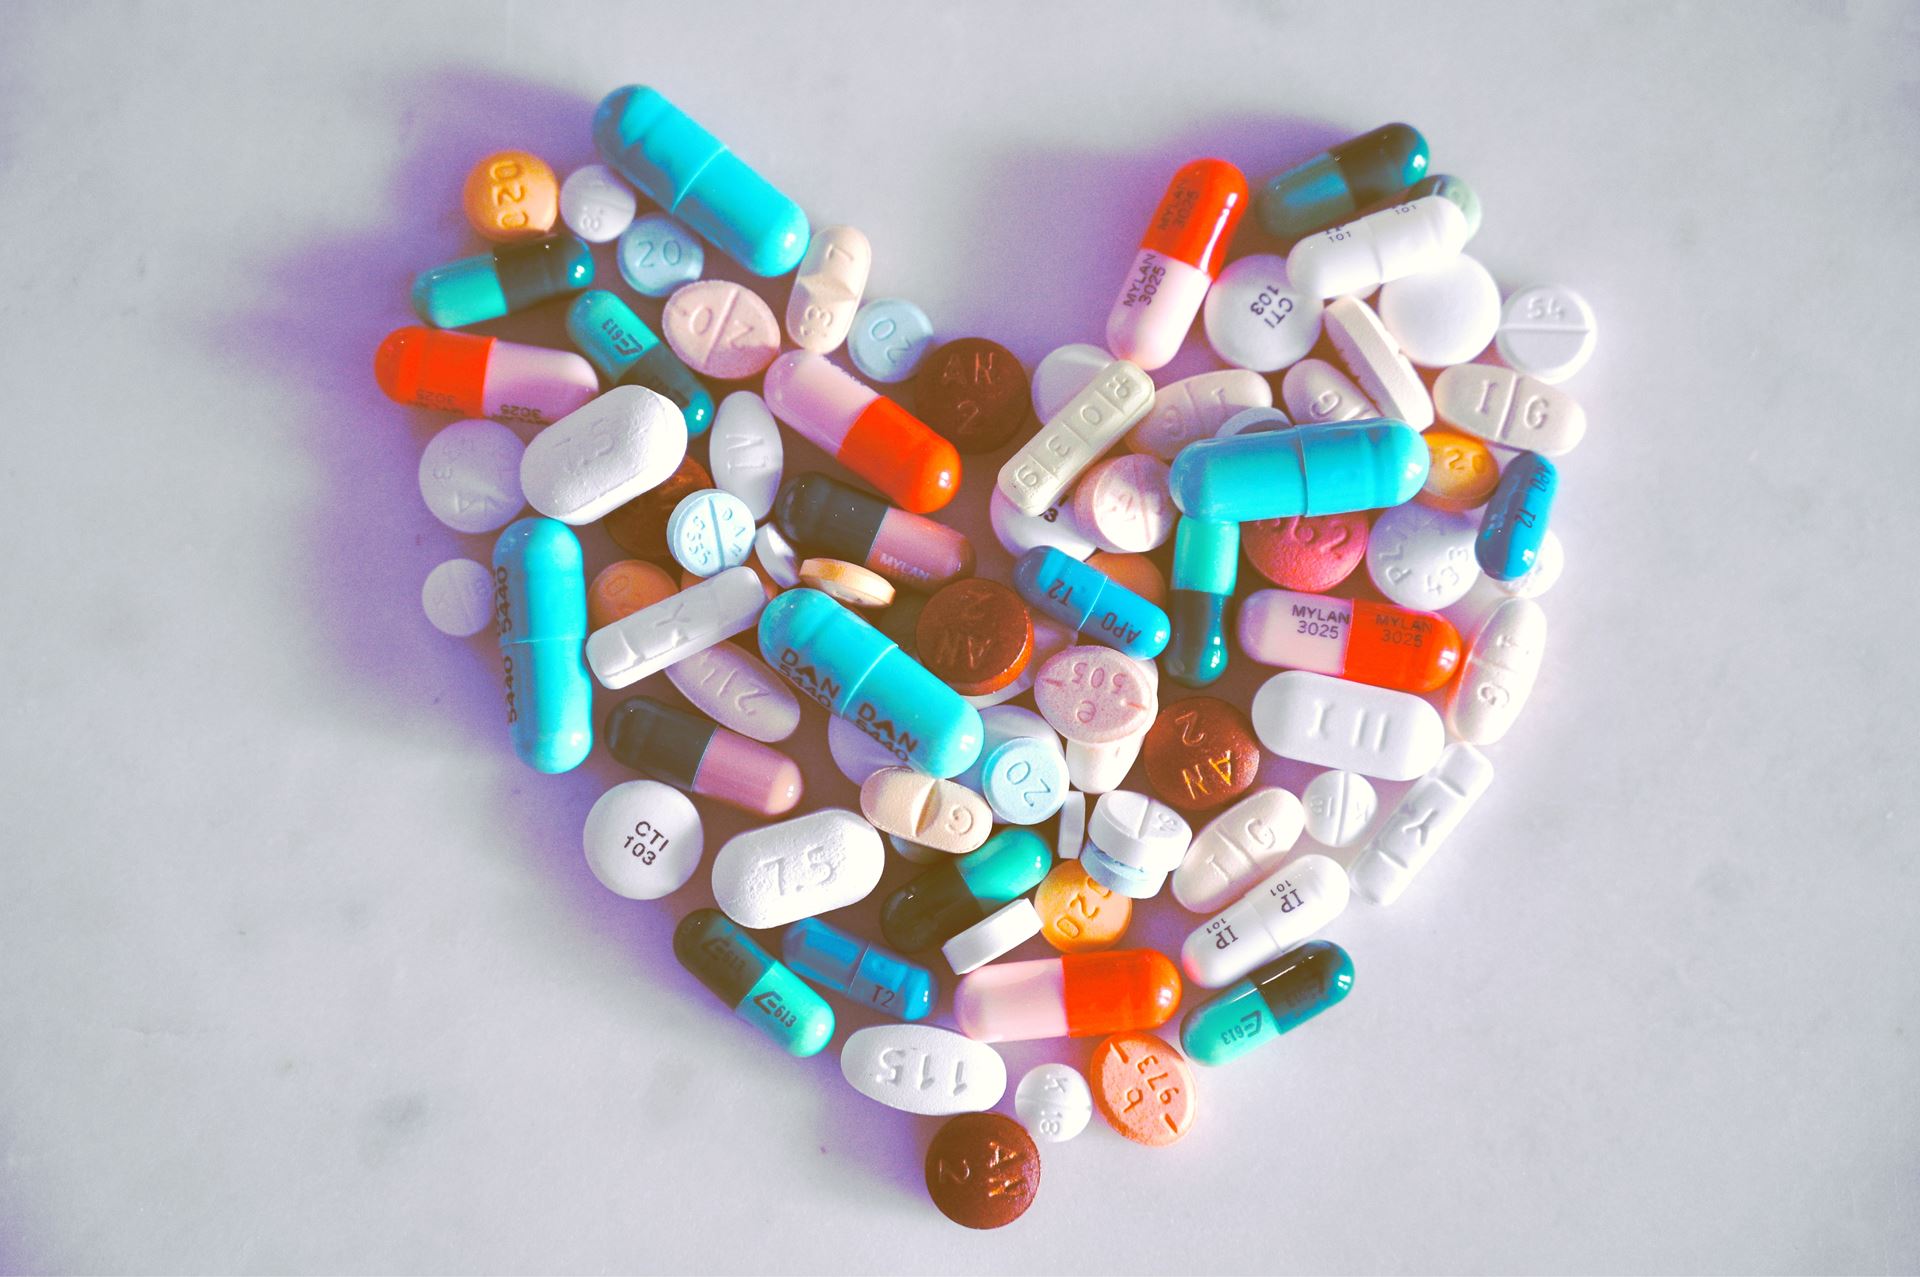 A selection of pills arranged in the shape of a heart